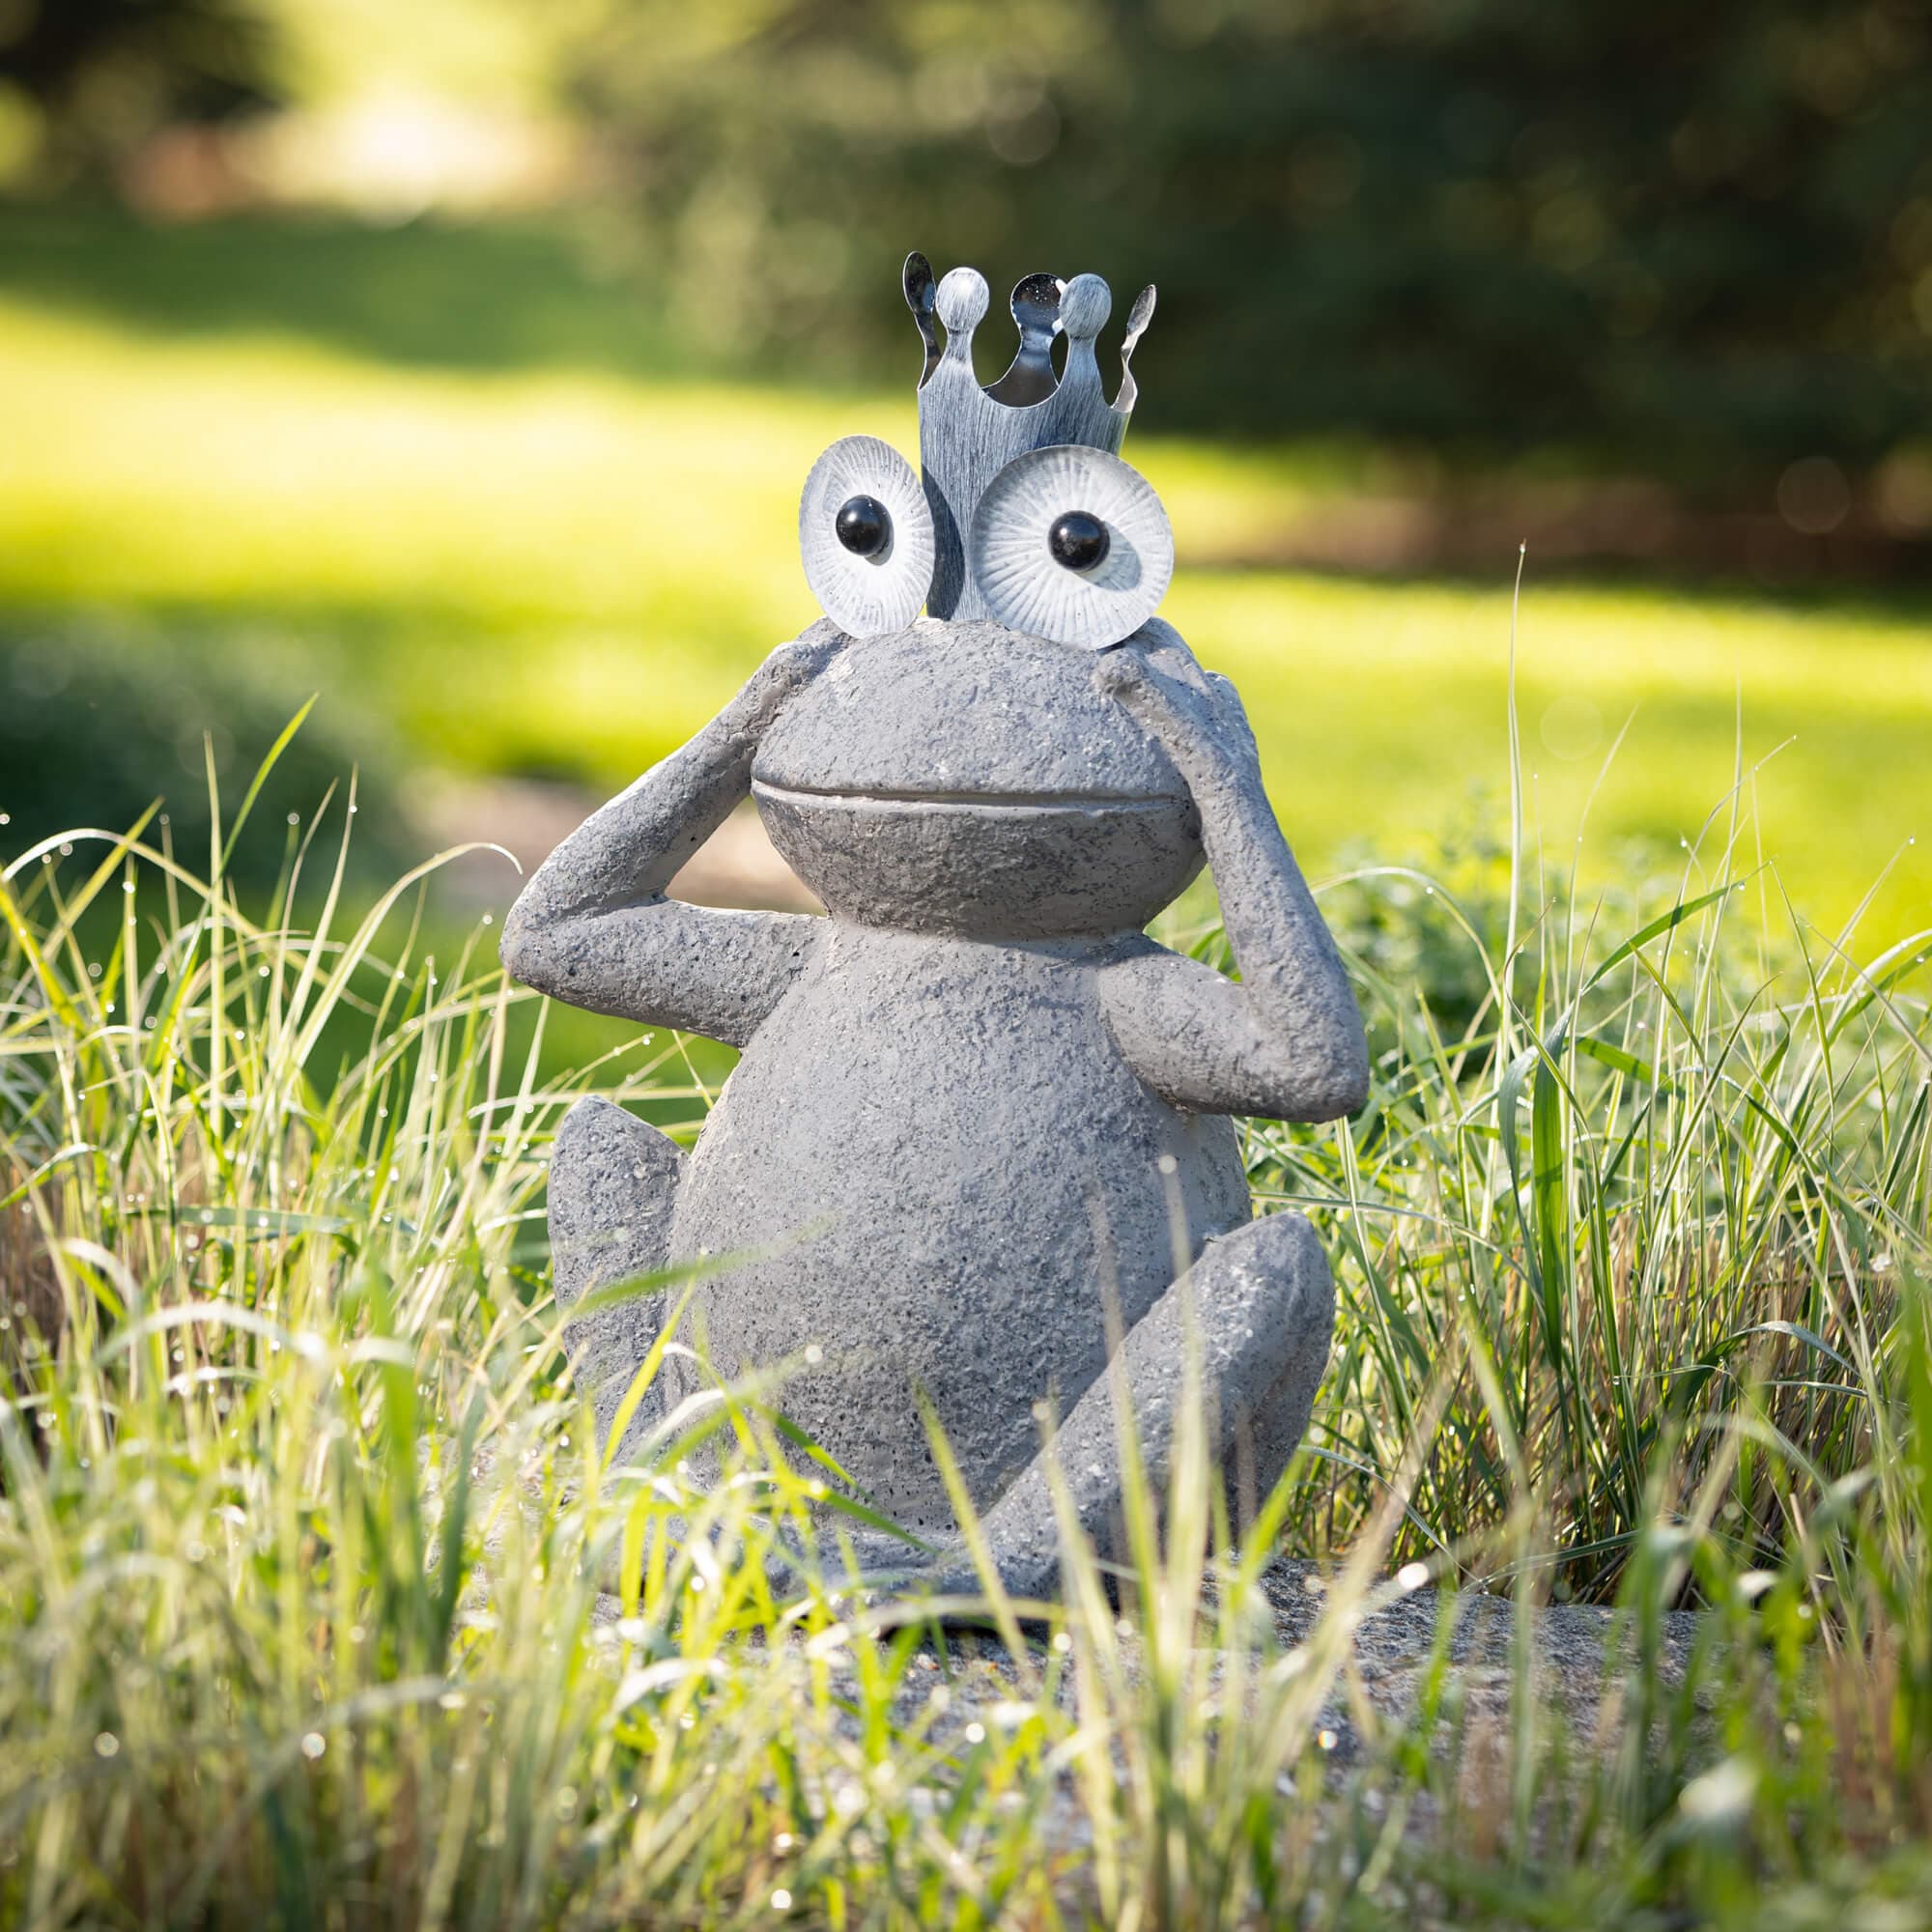 Gray Frog Garden Statues Elevate Home Decor - Outdoors